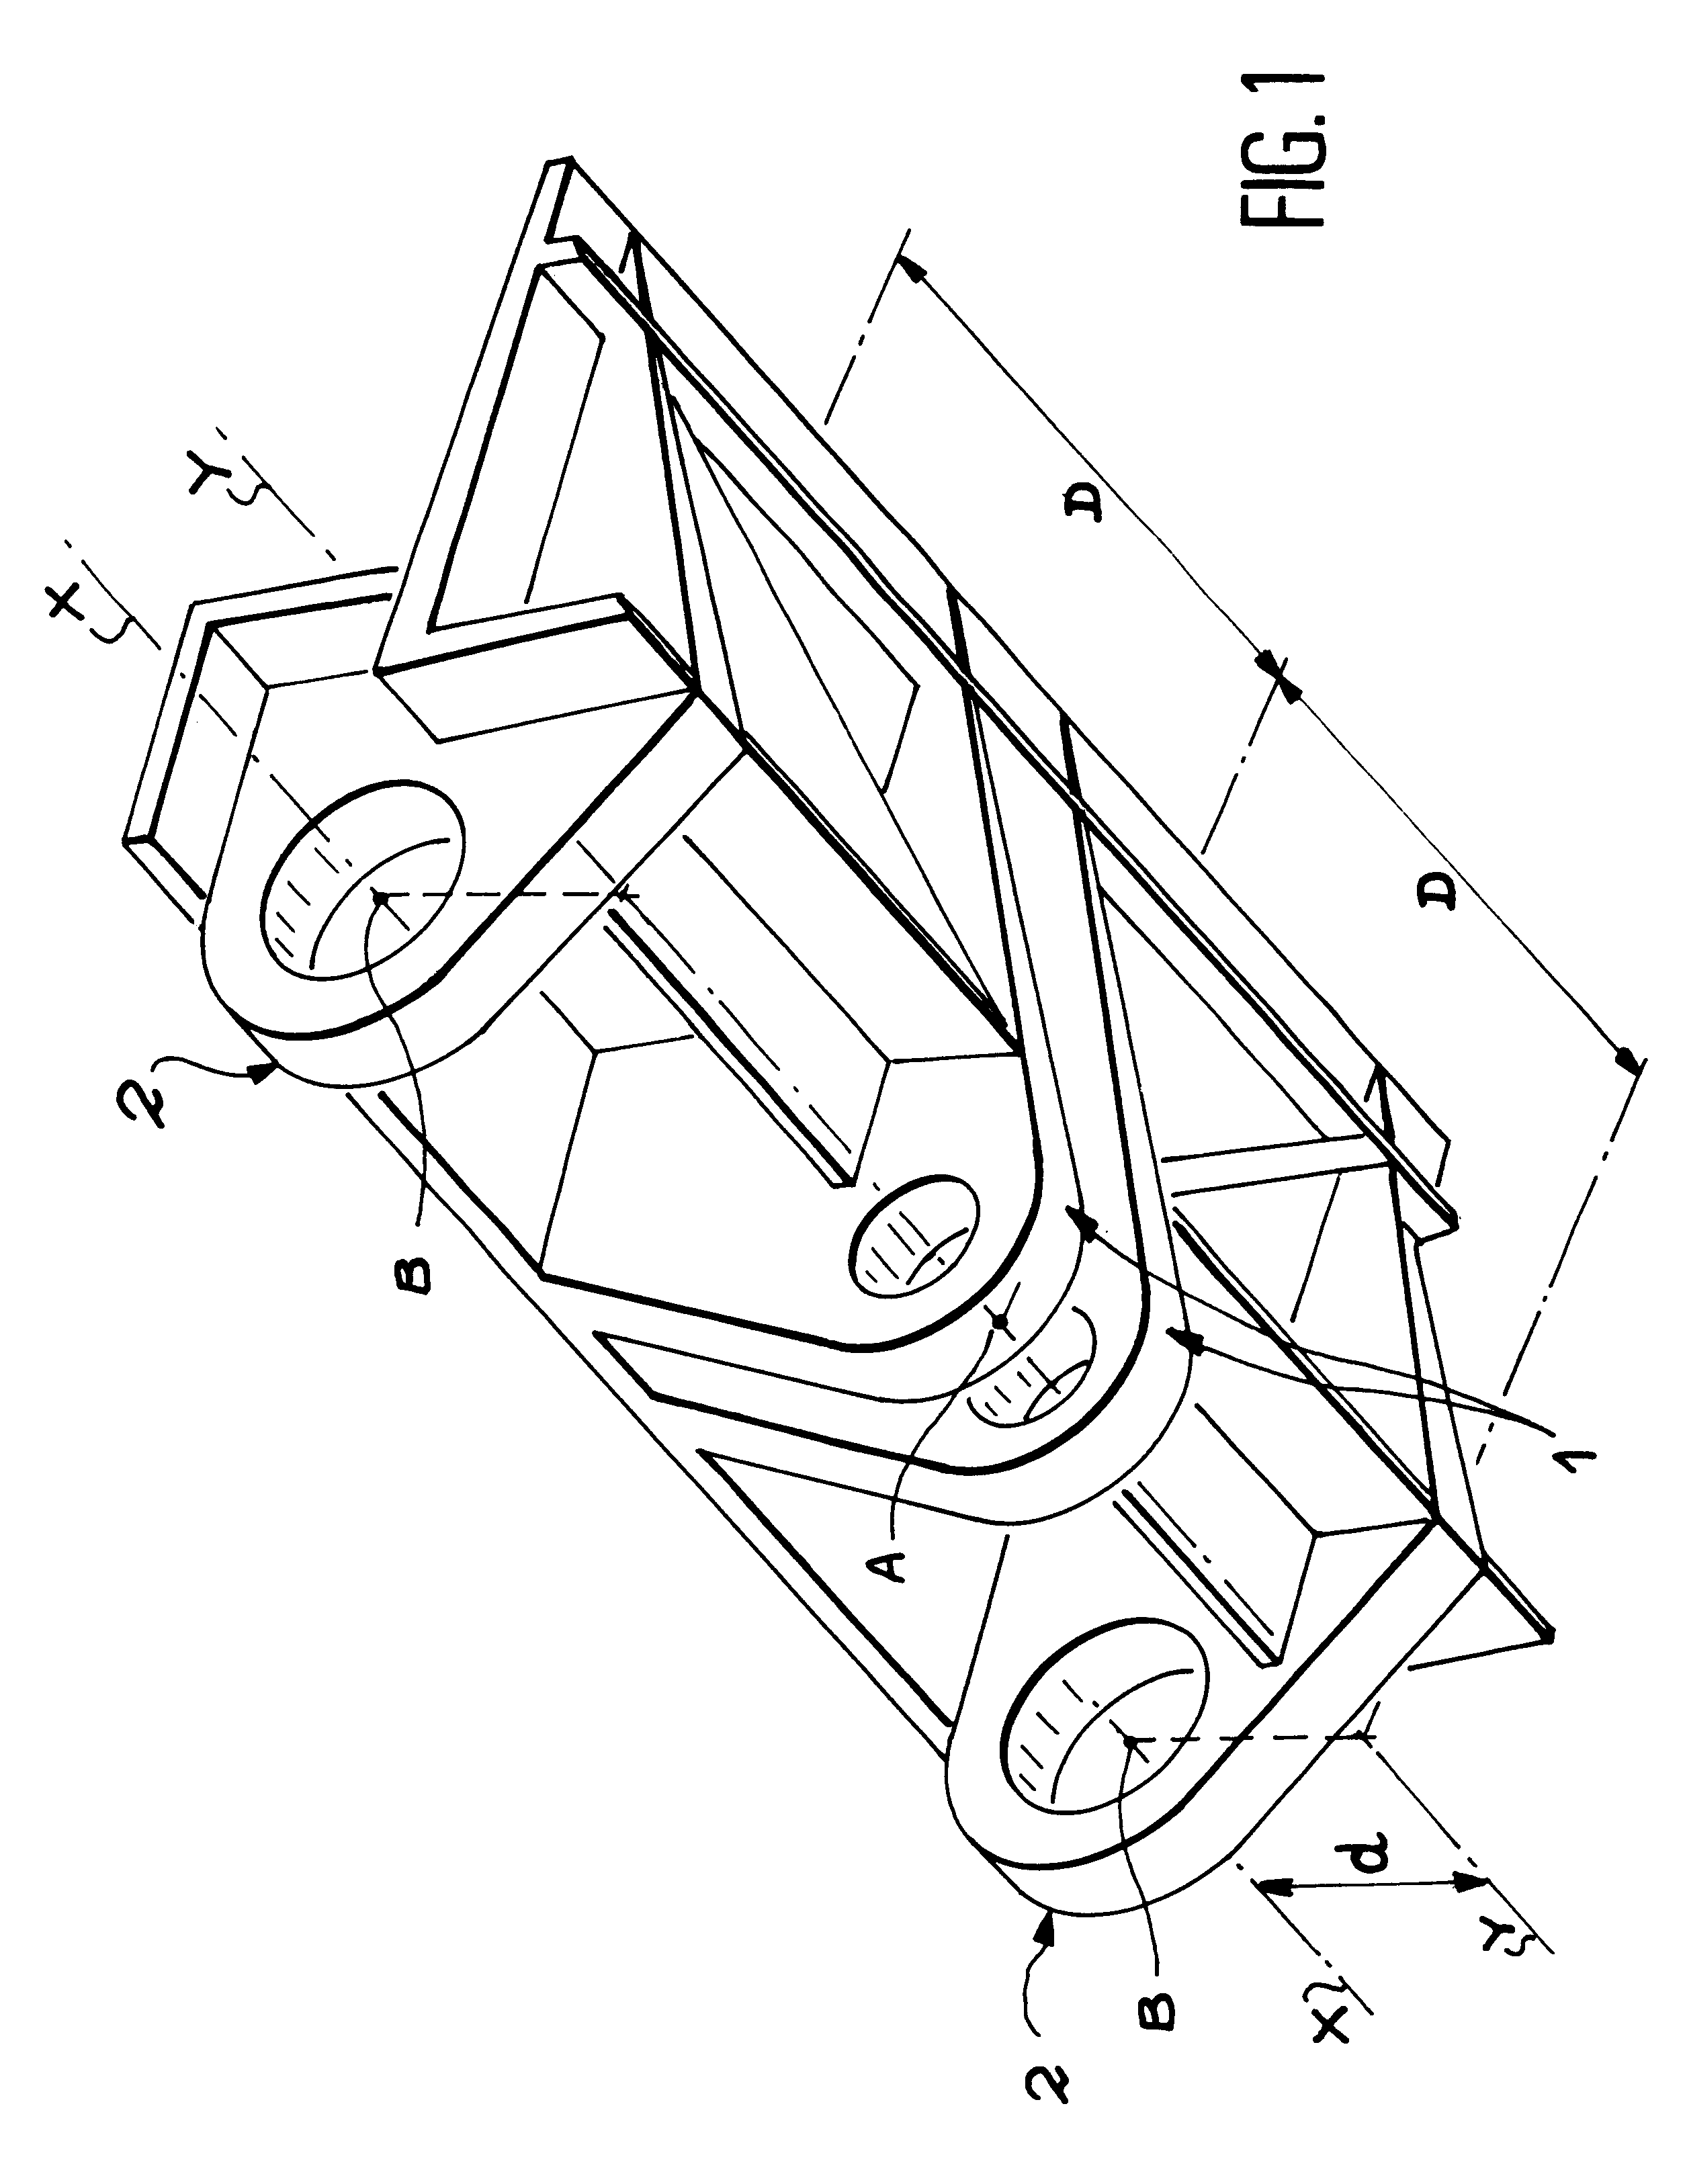 Device and mechanism for transmission of radial forces between the central and end regions of this device